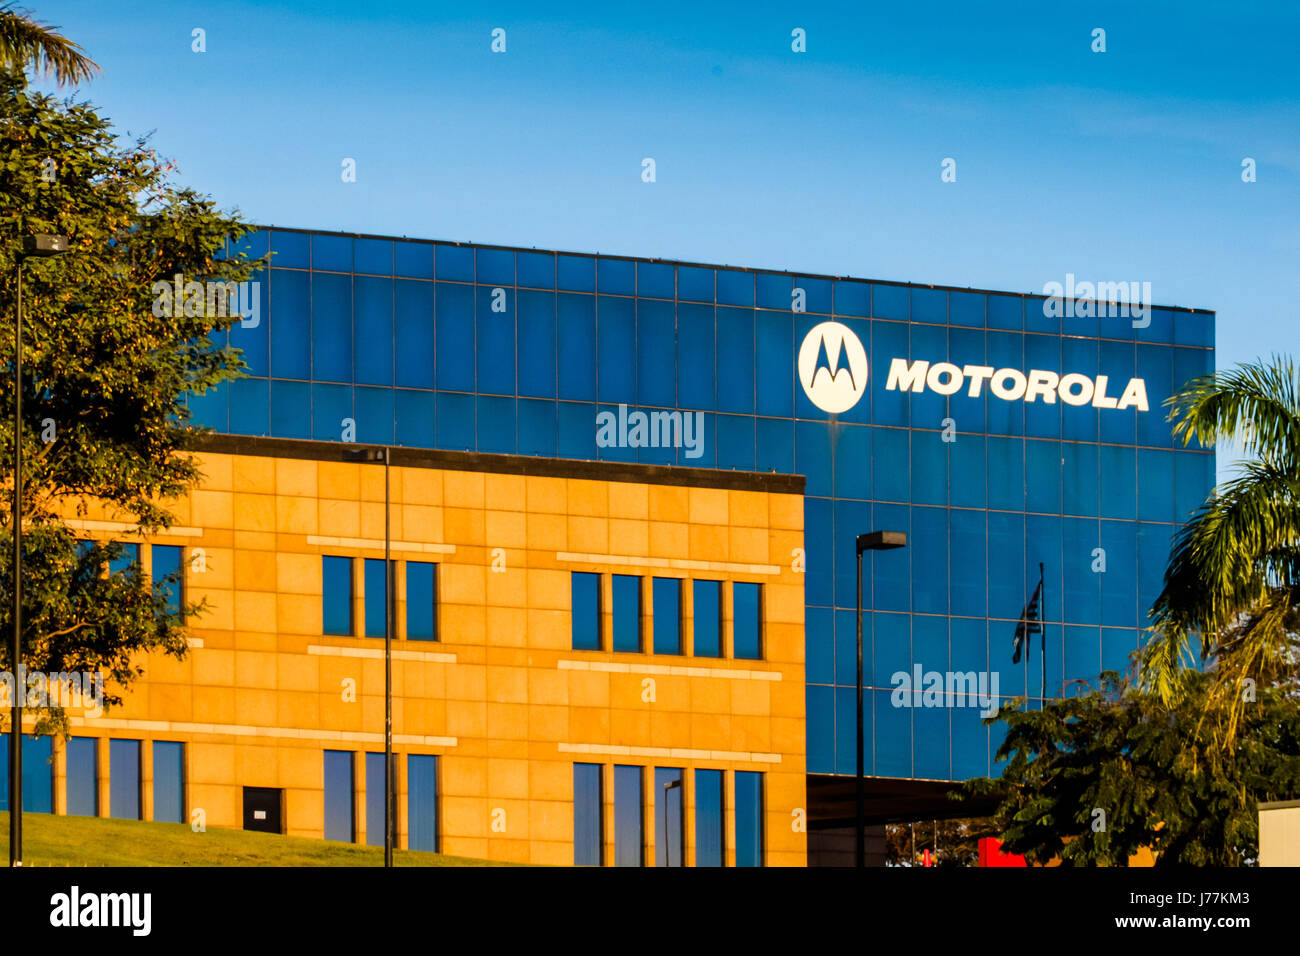 JAGUARIÚNA, SP - 23.05.2017: FABRICA DA MOTOROLA - Facade of the Motorola  Mobility Brasil factory, located in Jaguariúna, interior of SP. Motorola,  recently acquired by Lenovo, is one of the largest handset